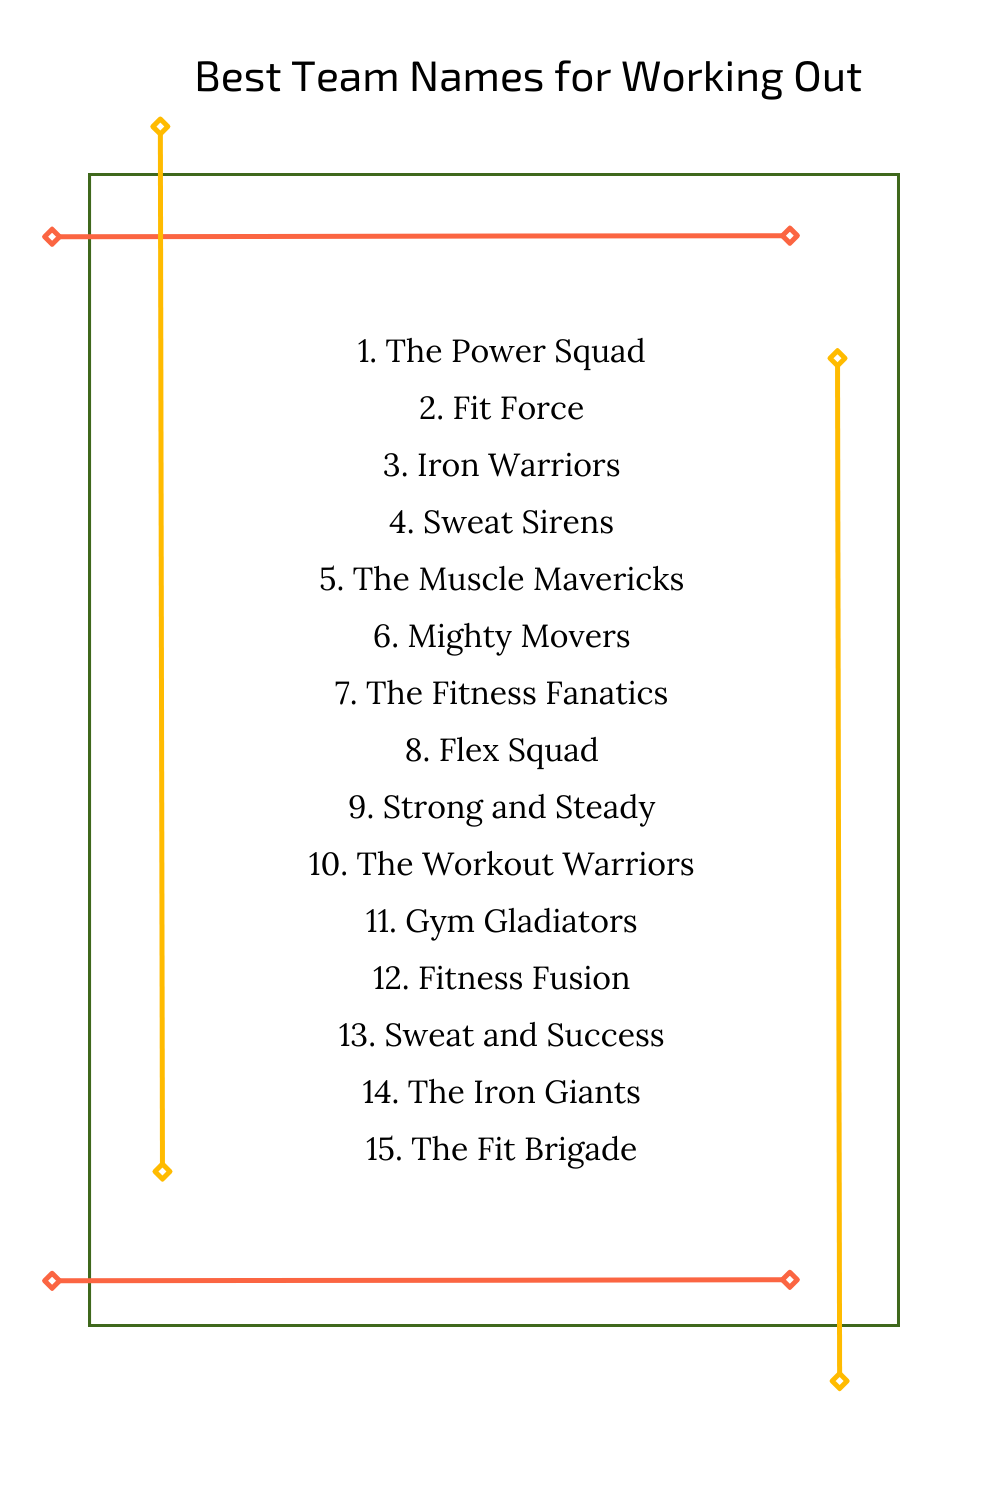 Best Team Names for Working Out